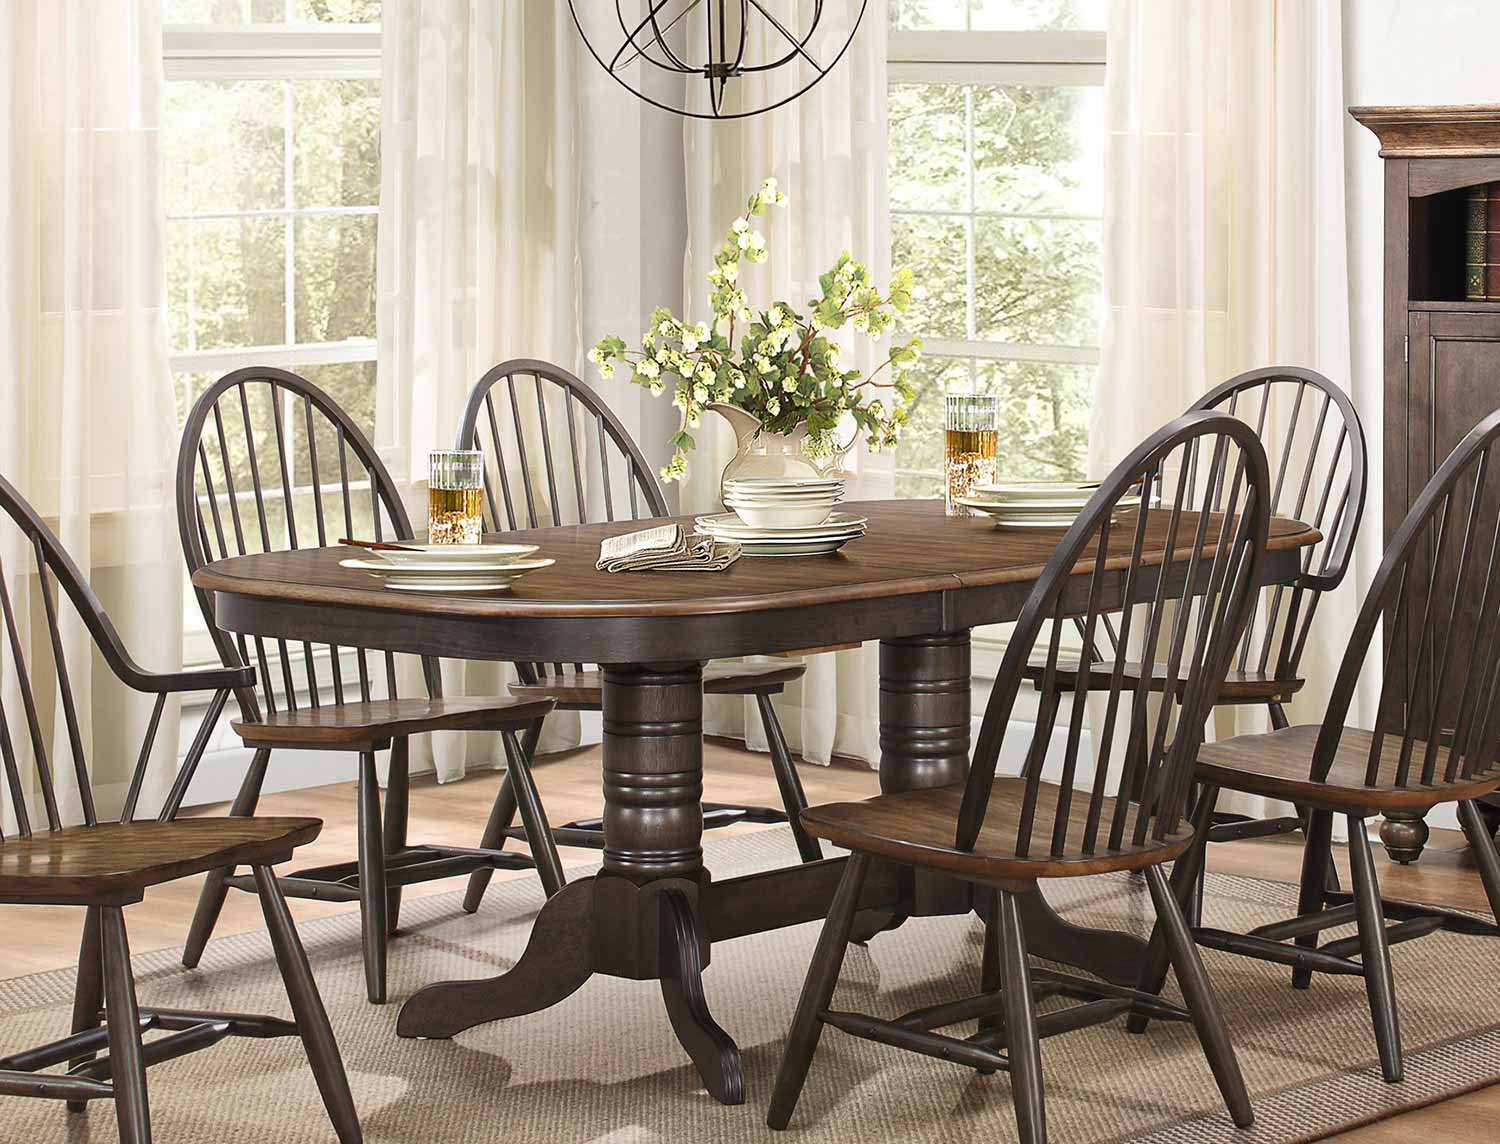 Homelegance Cline Rectangular Double Pedestal Dining Table with Butterfly Leaf - Two tone finish